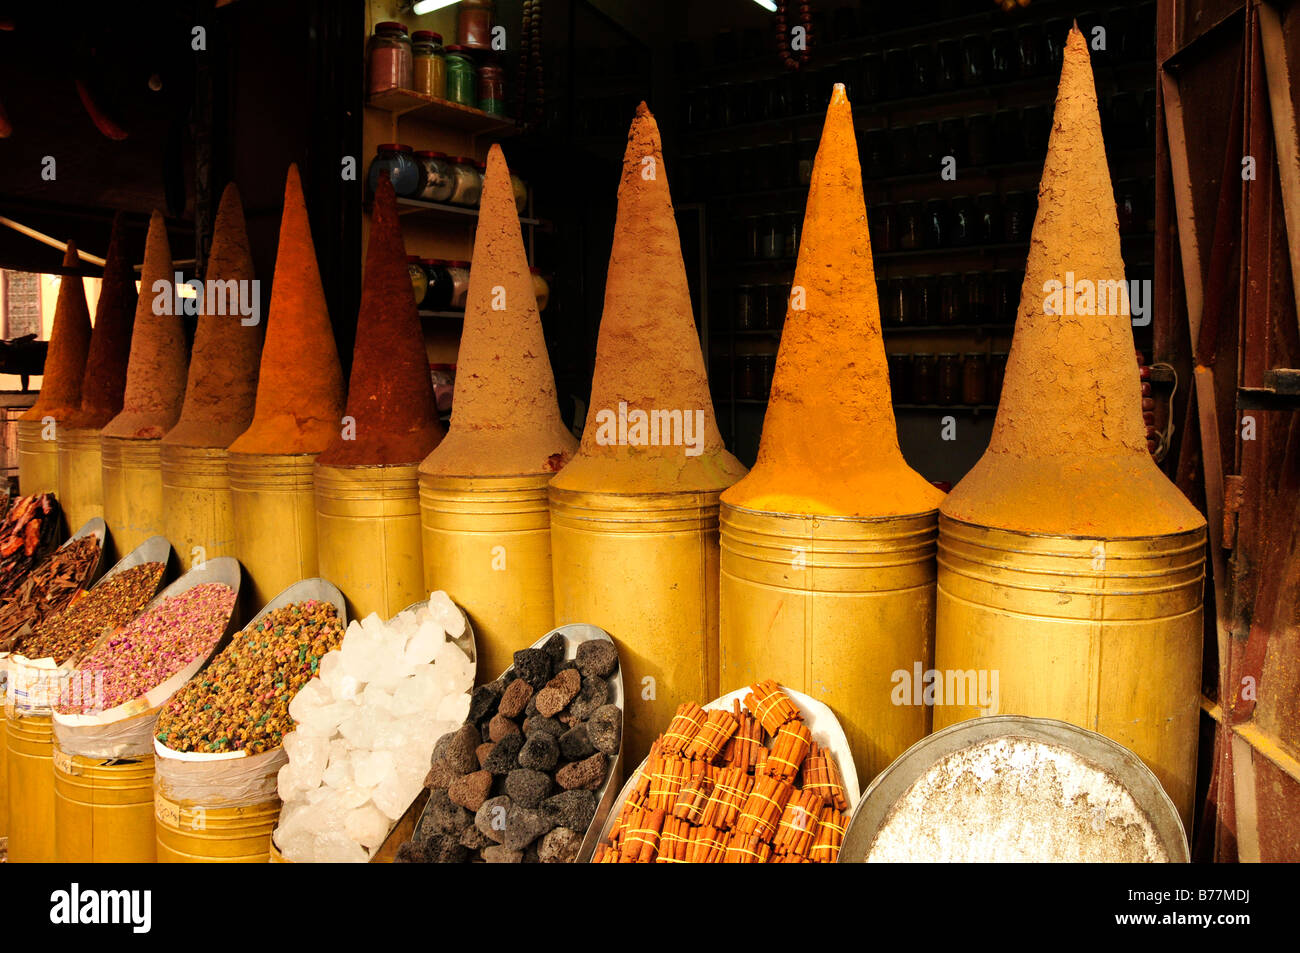 Piles of spices in the Souk, market, in the Medina, historic city centre of Marrakech, Morocco, Africa Stock Photo